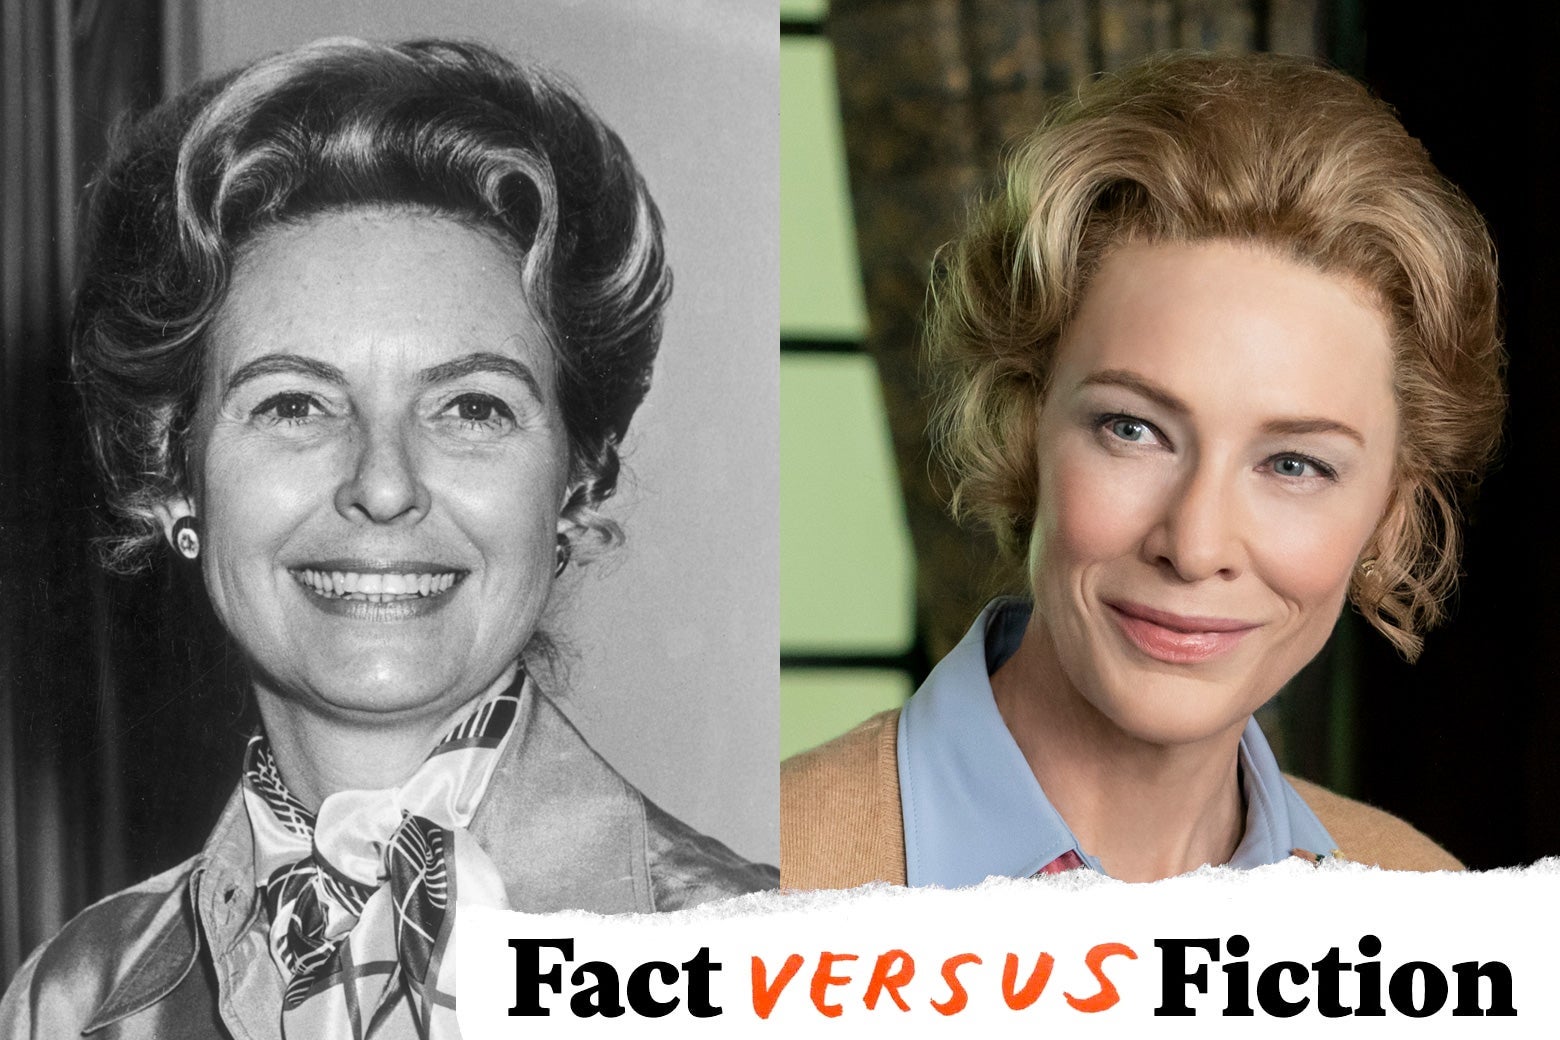 Side-by-side photos of Phyllis Schlafly and Cate Blanchett as Phyllis Schlafly